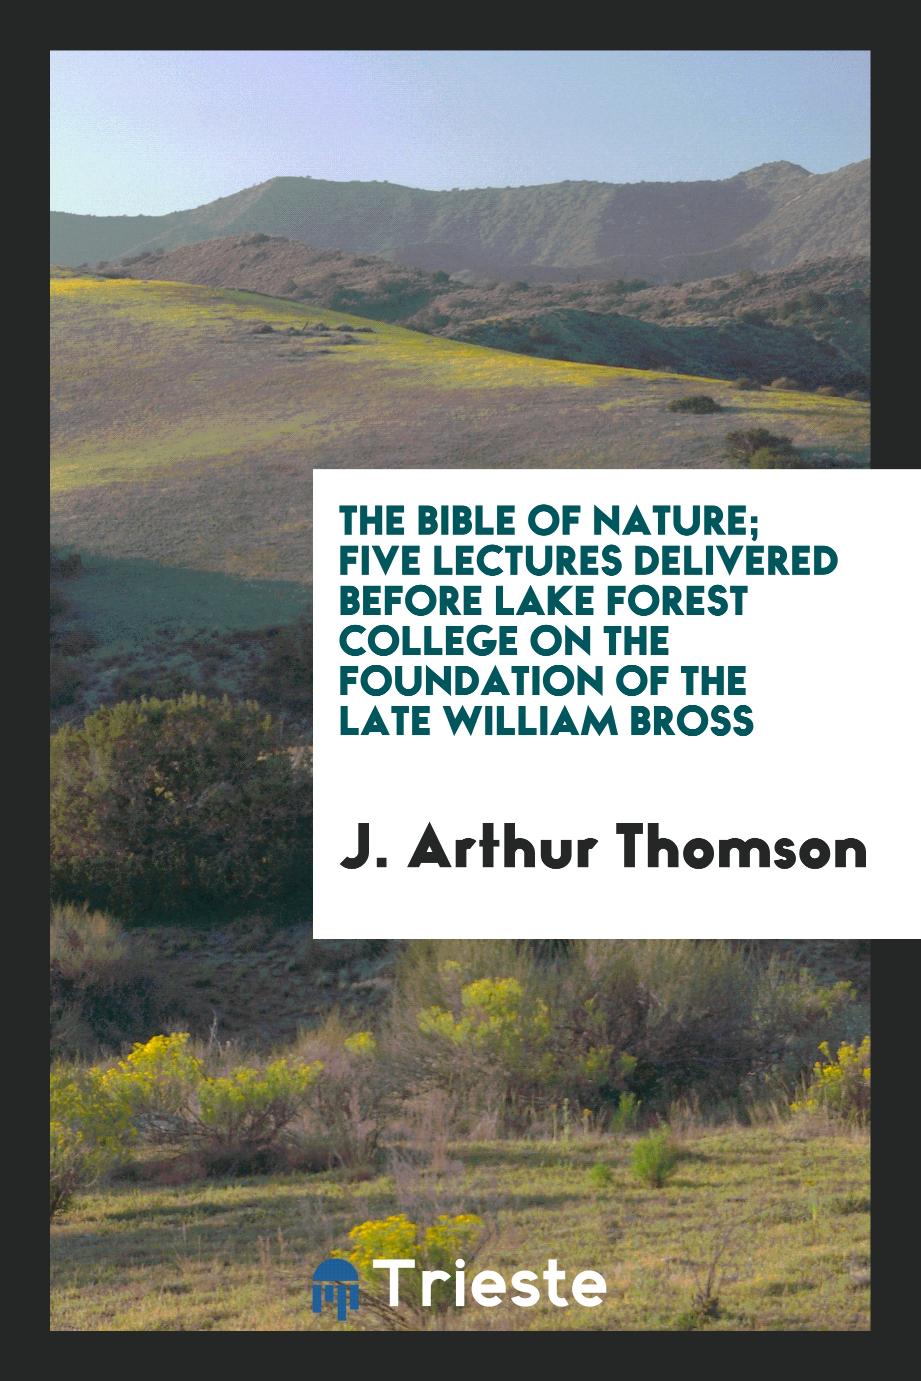 The Bible of nature; five lectures delivered before Lake Forest college on the foundation of the late William Bross